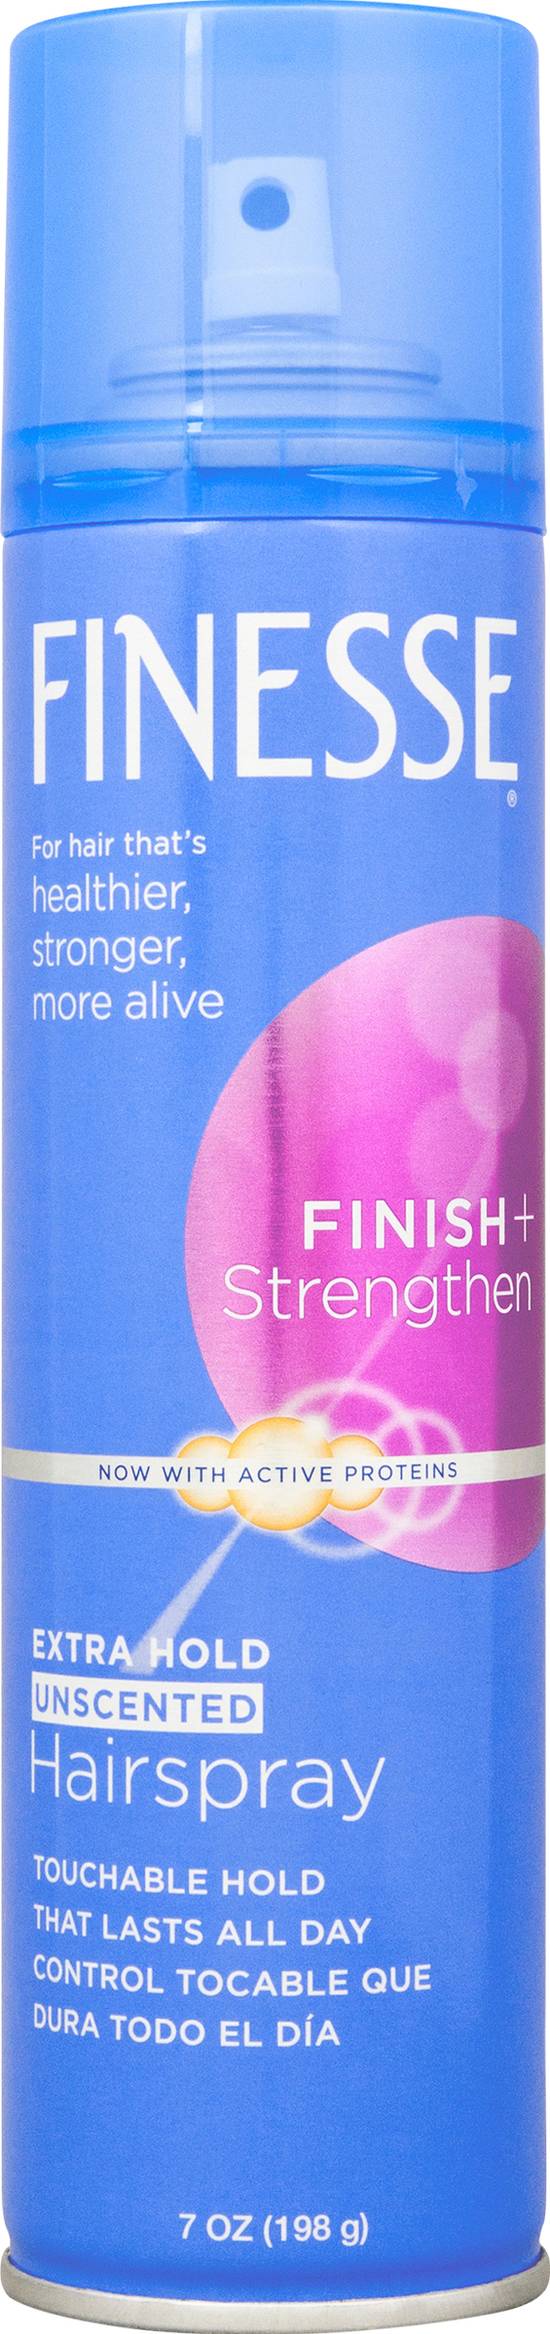 Finesse Extra Hold Unscented Hairspray